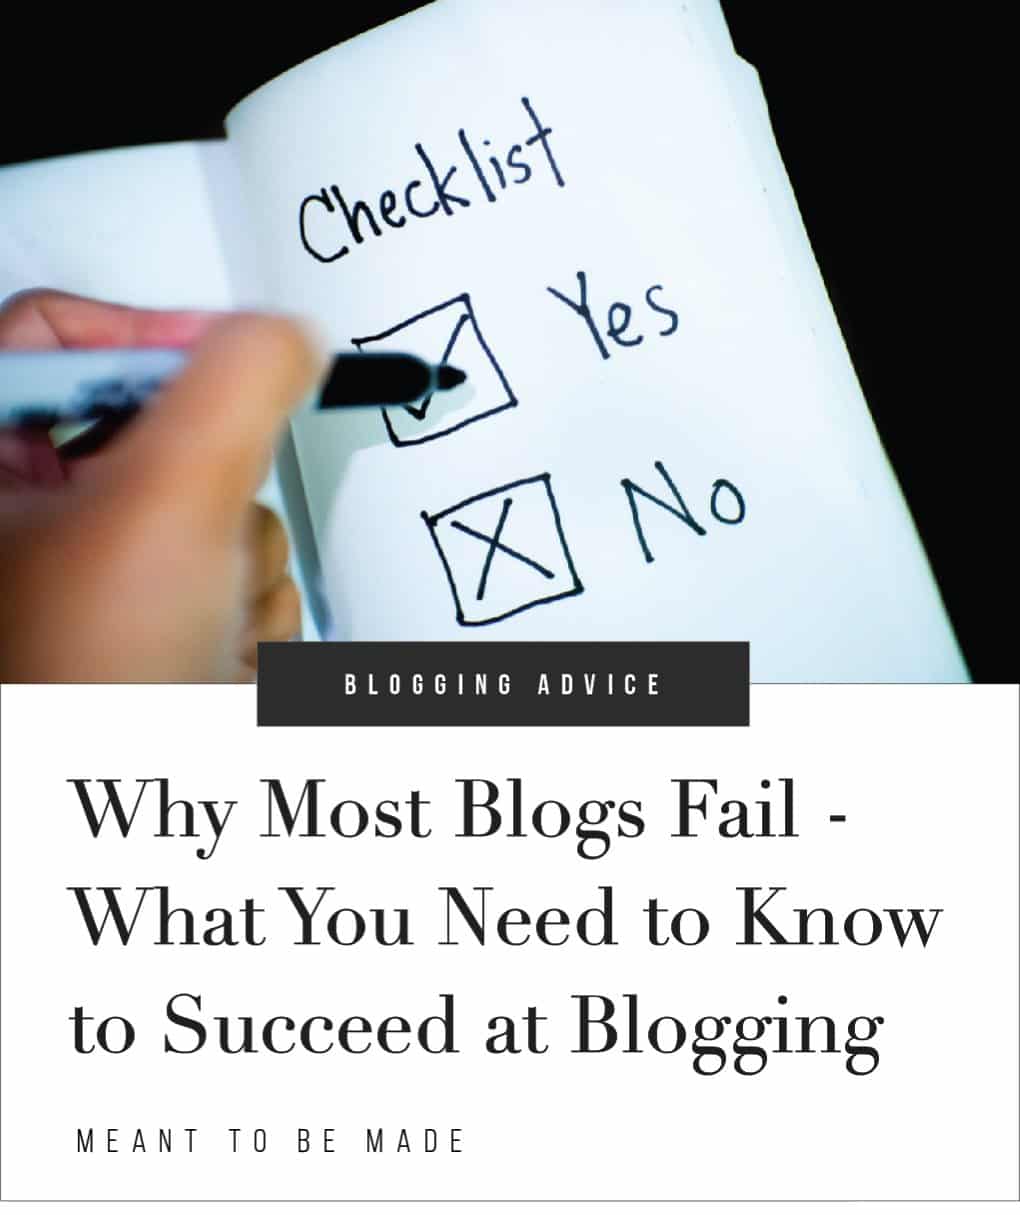 Why Most Blogs Fail - What You Need to Know to Succeed at Blogging